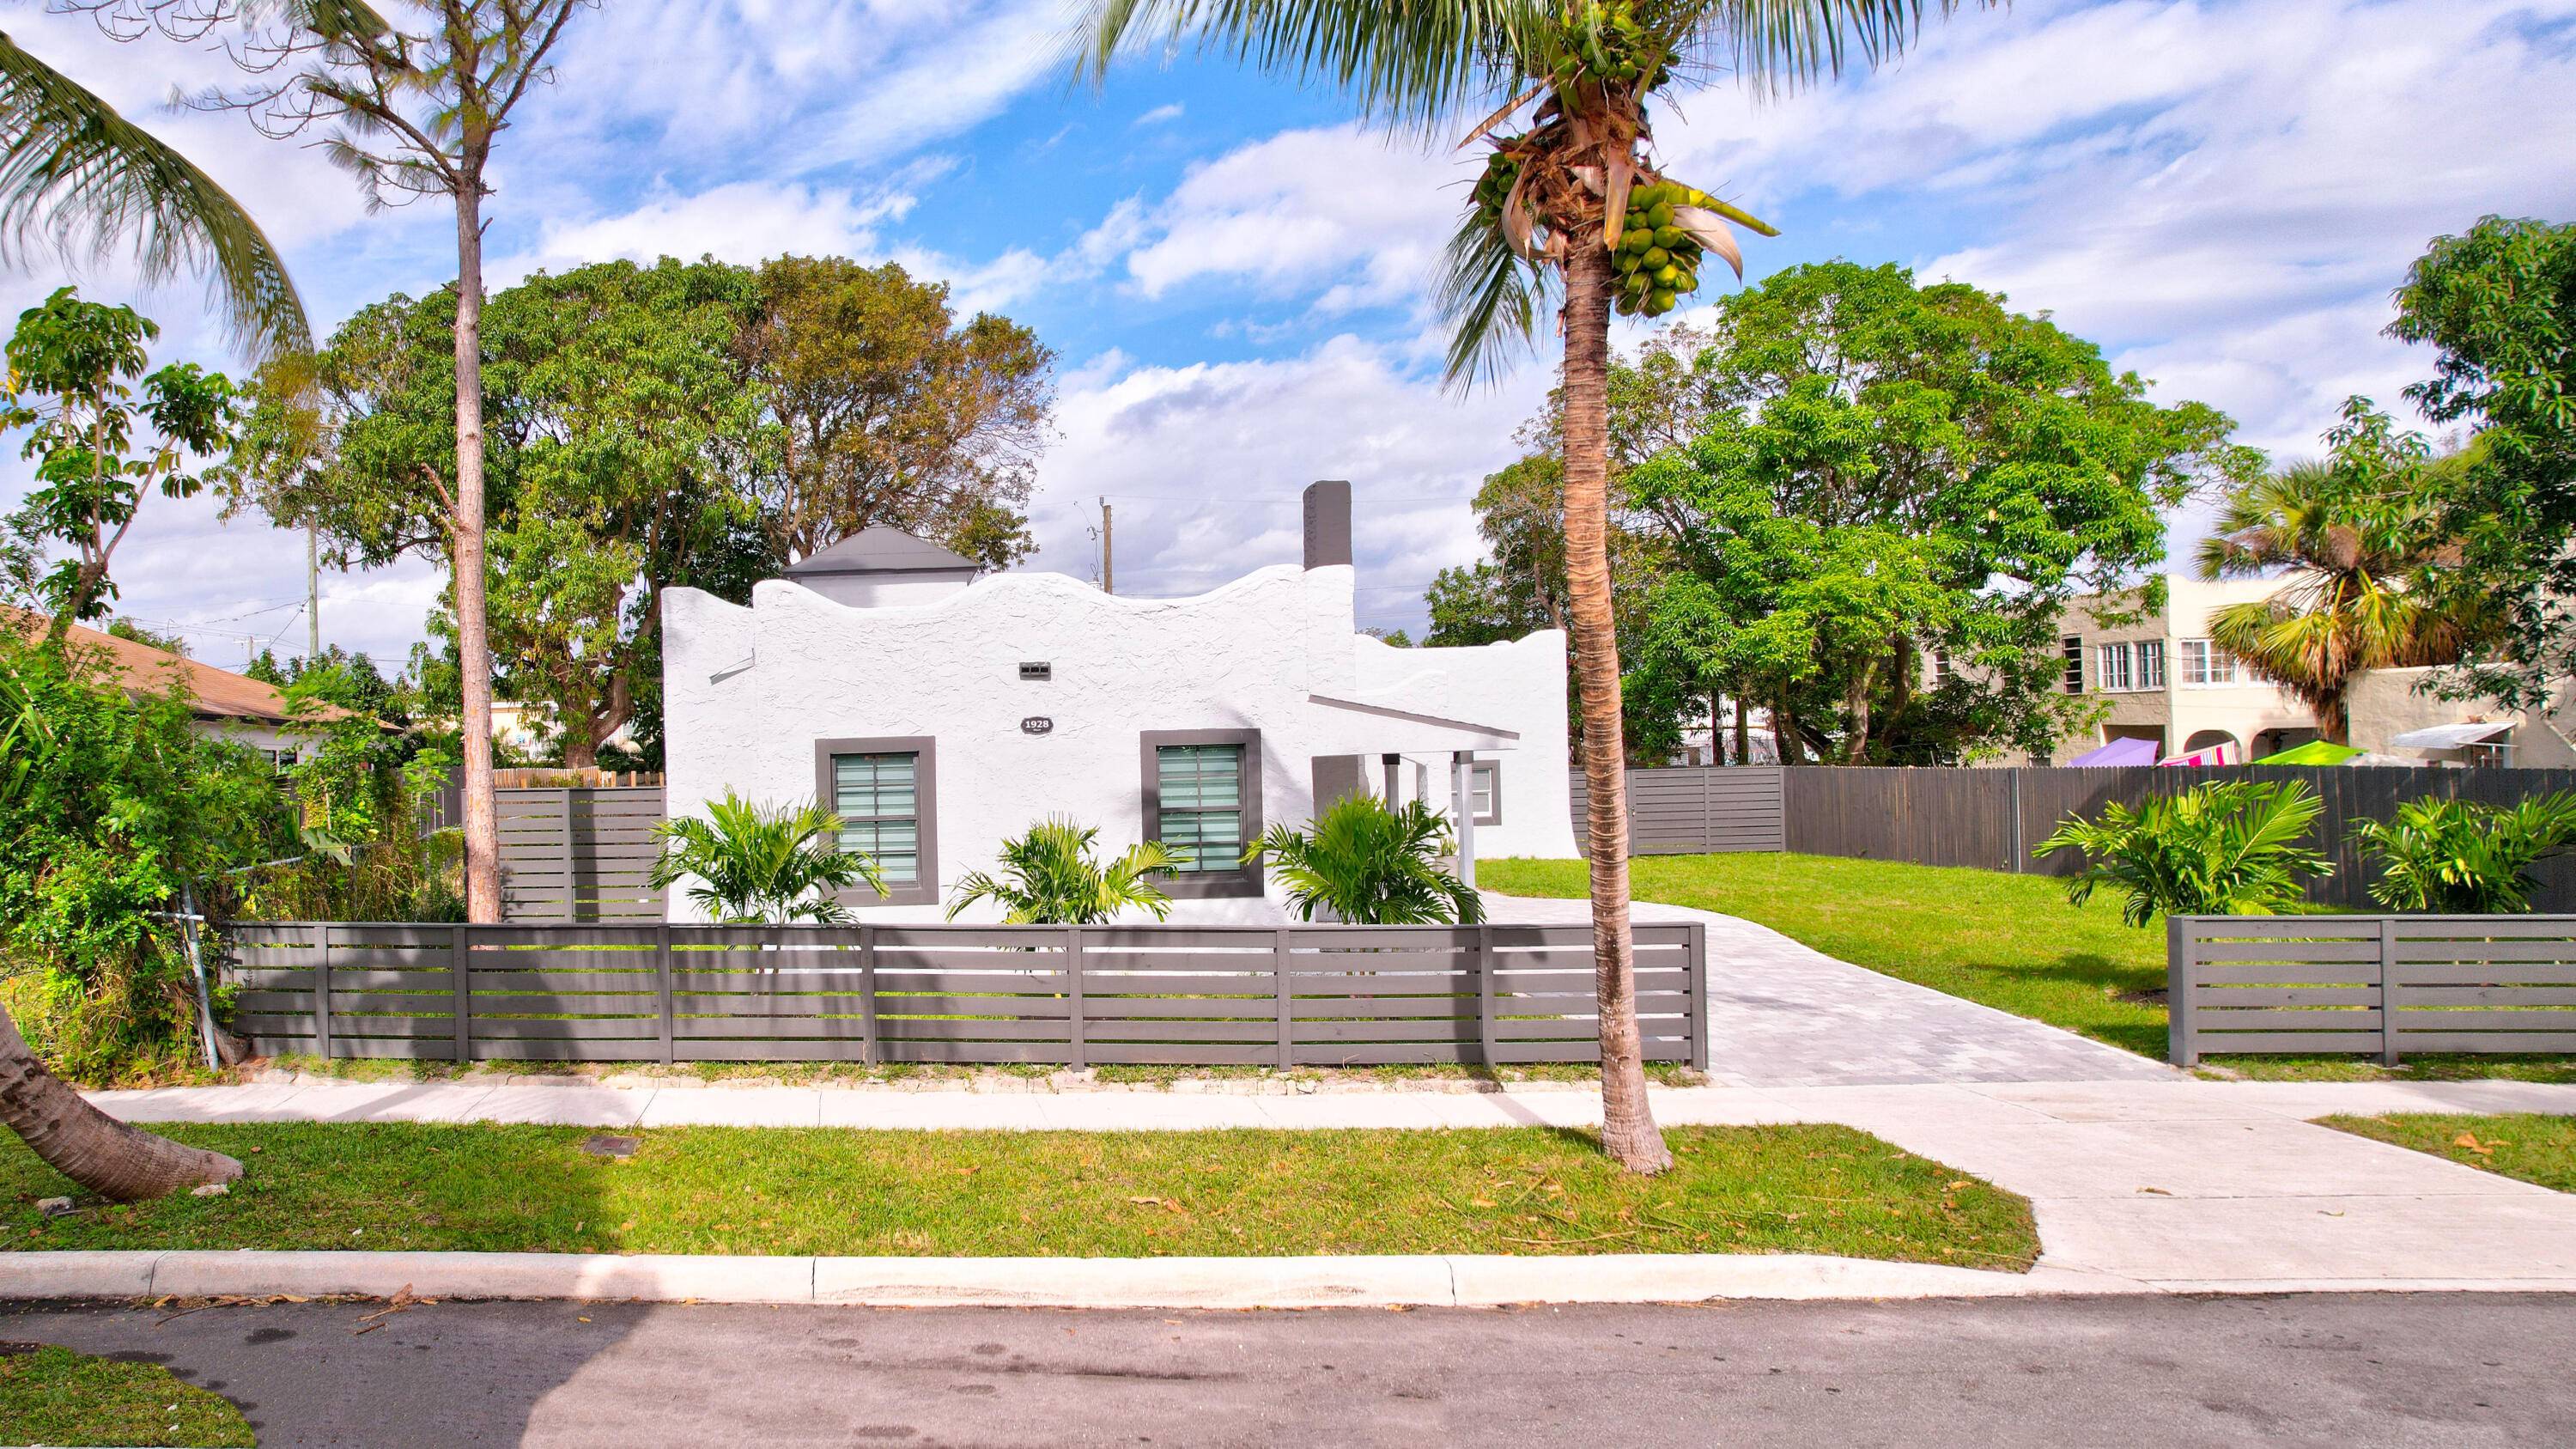 Step into a meticulously renovated 4 bedroom, 3 bathroom historic single family home in the heart of West Palm Beach.